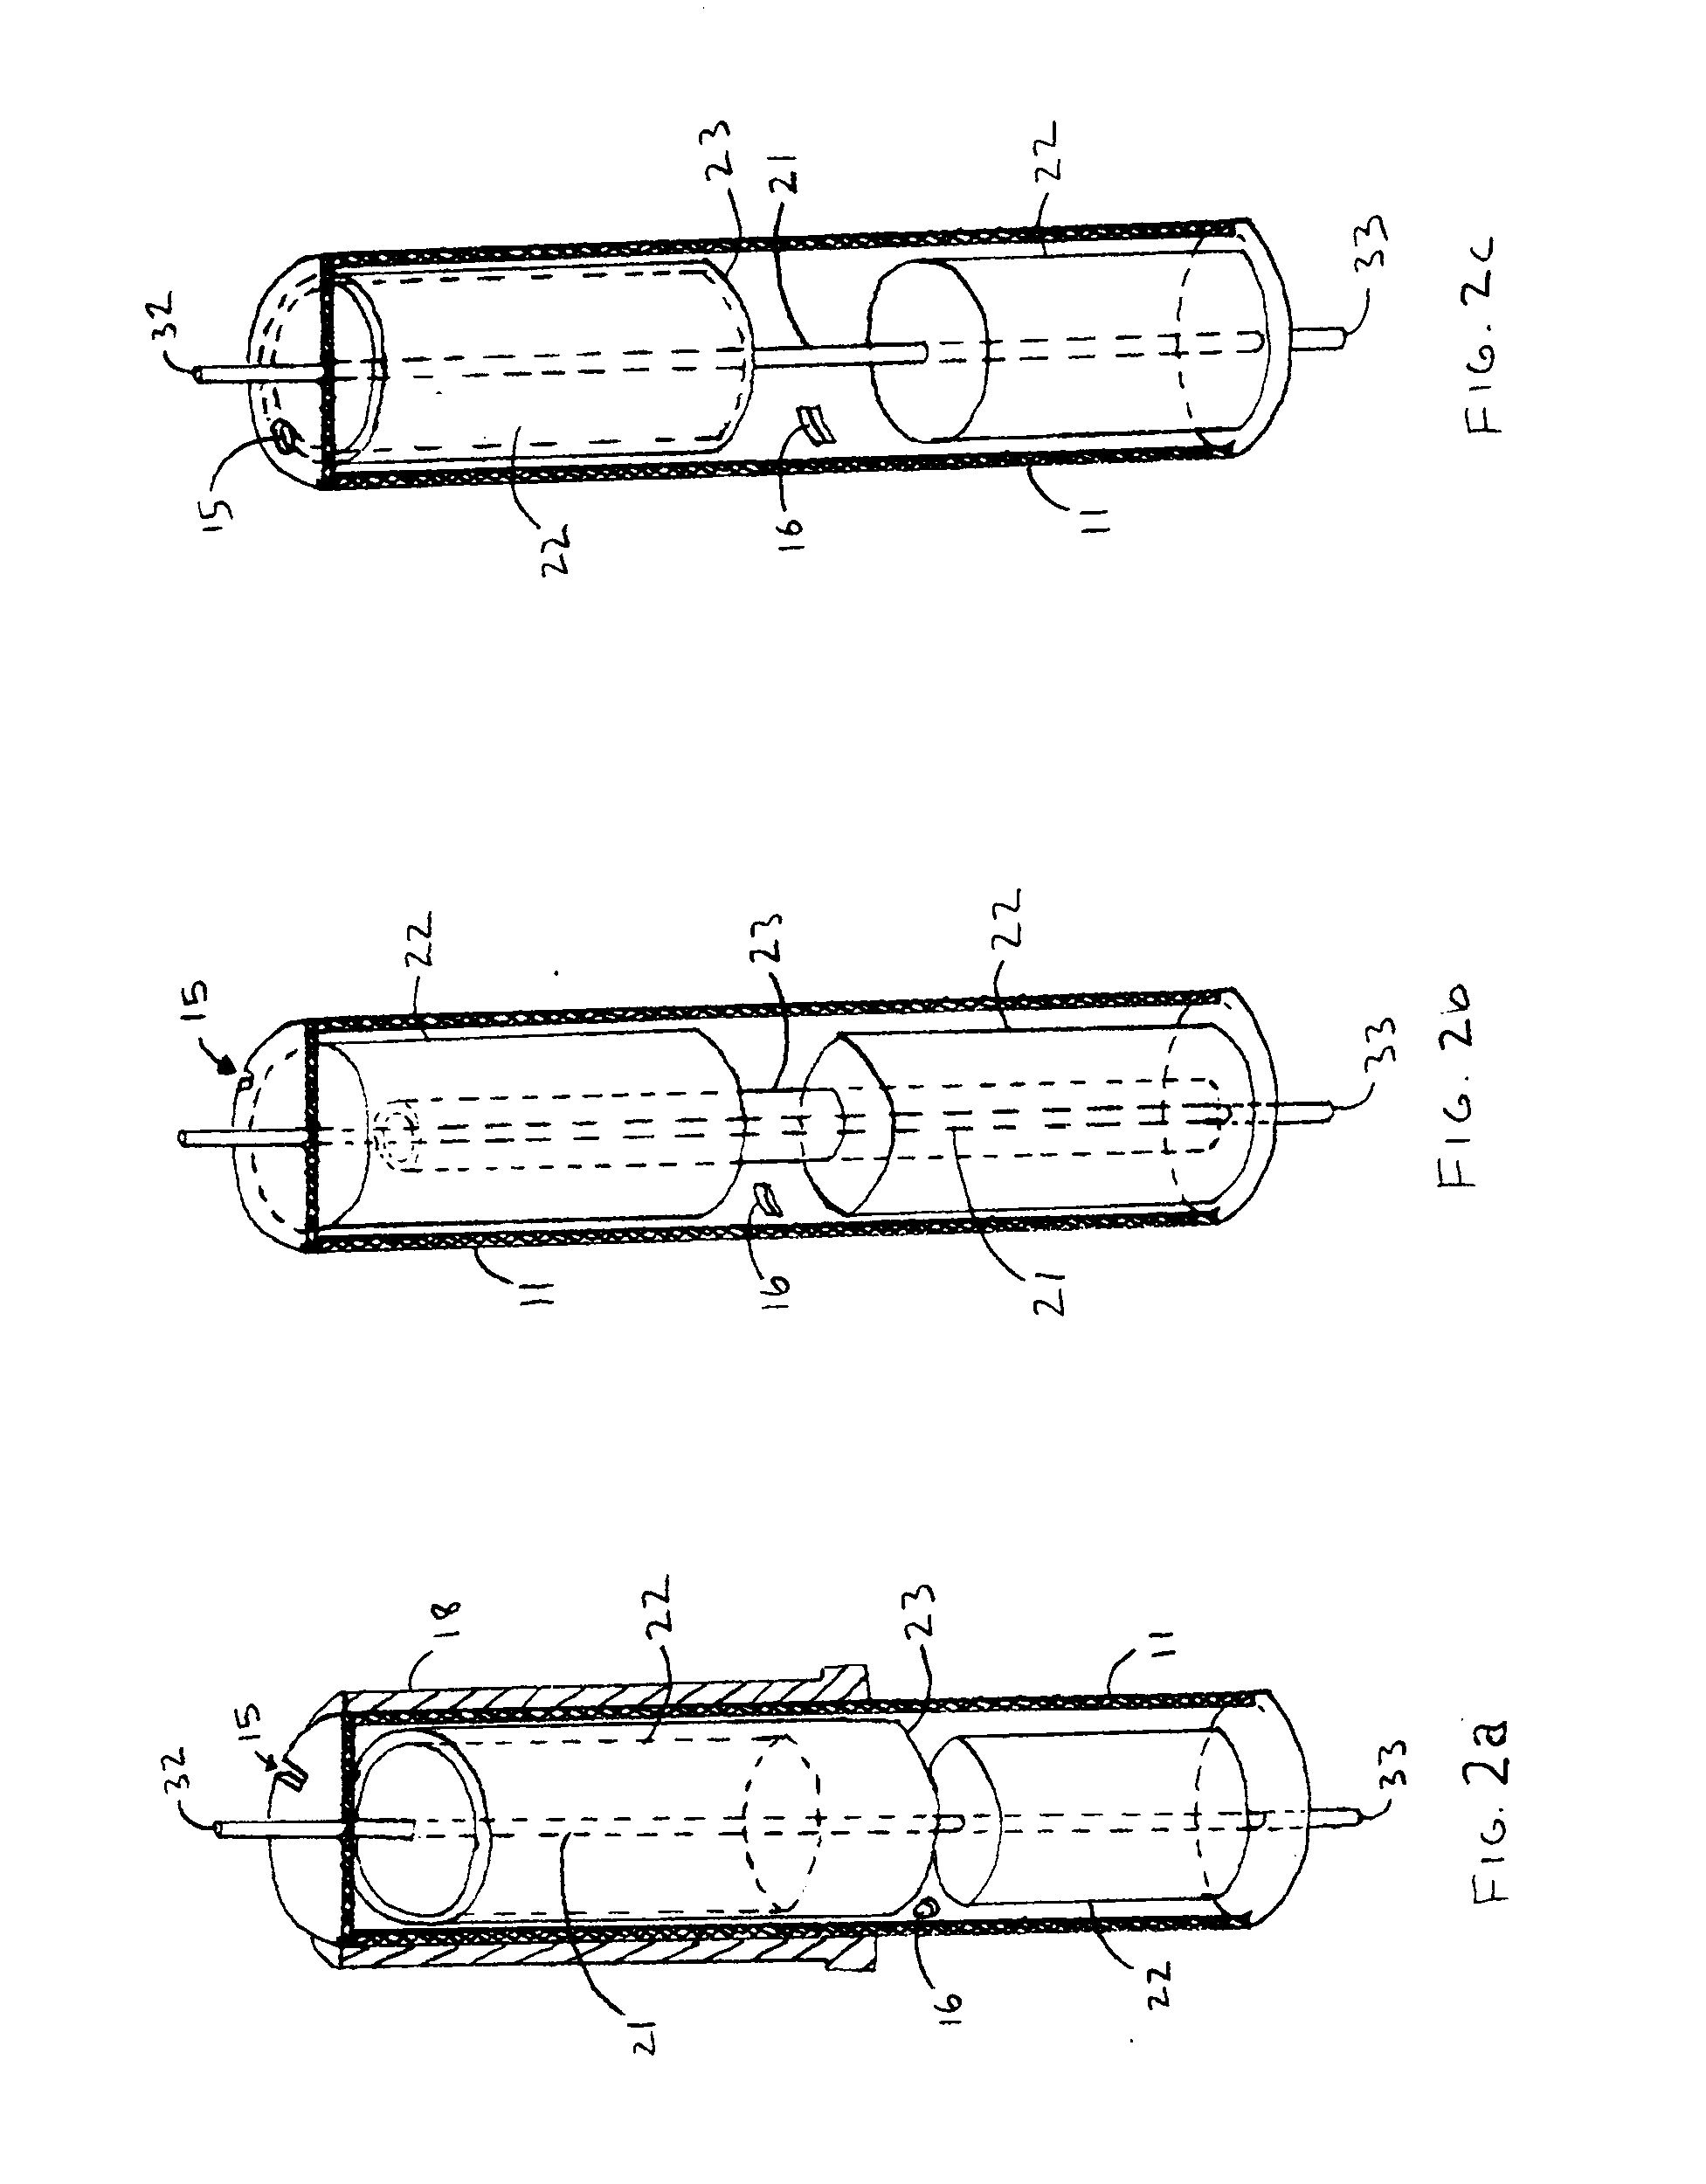 Sealed Vaporization Cartridge and Vaporization Systems for Using